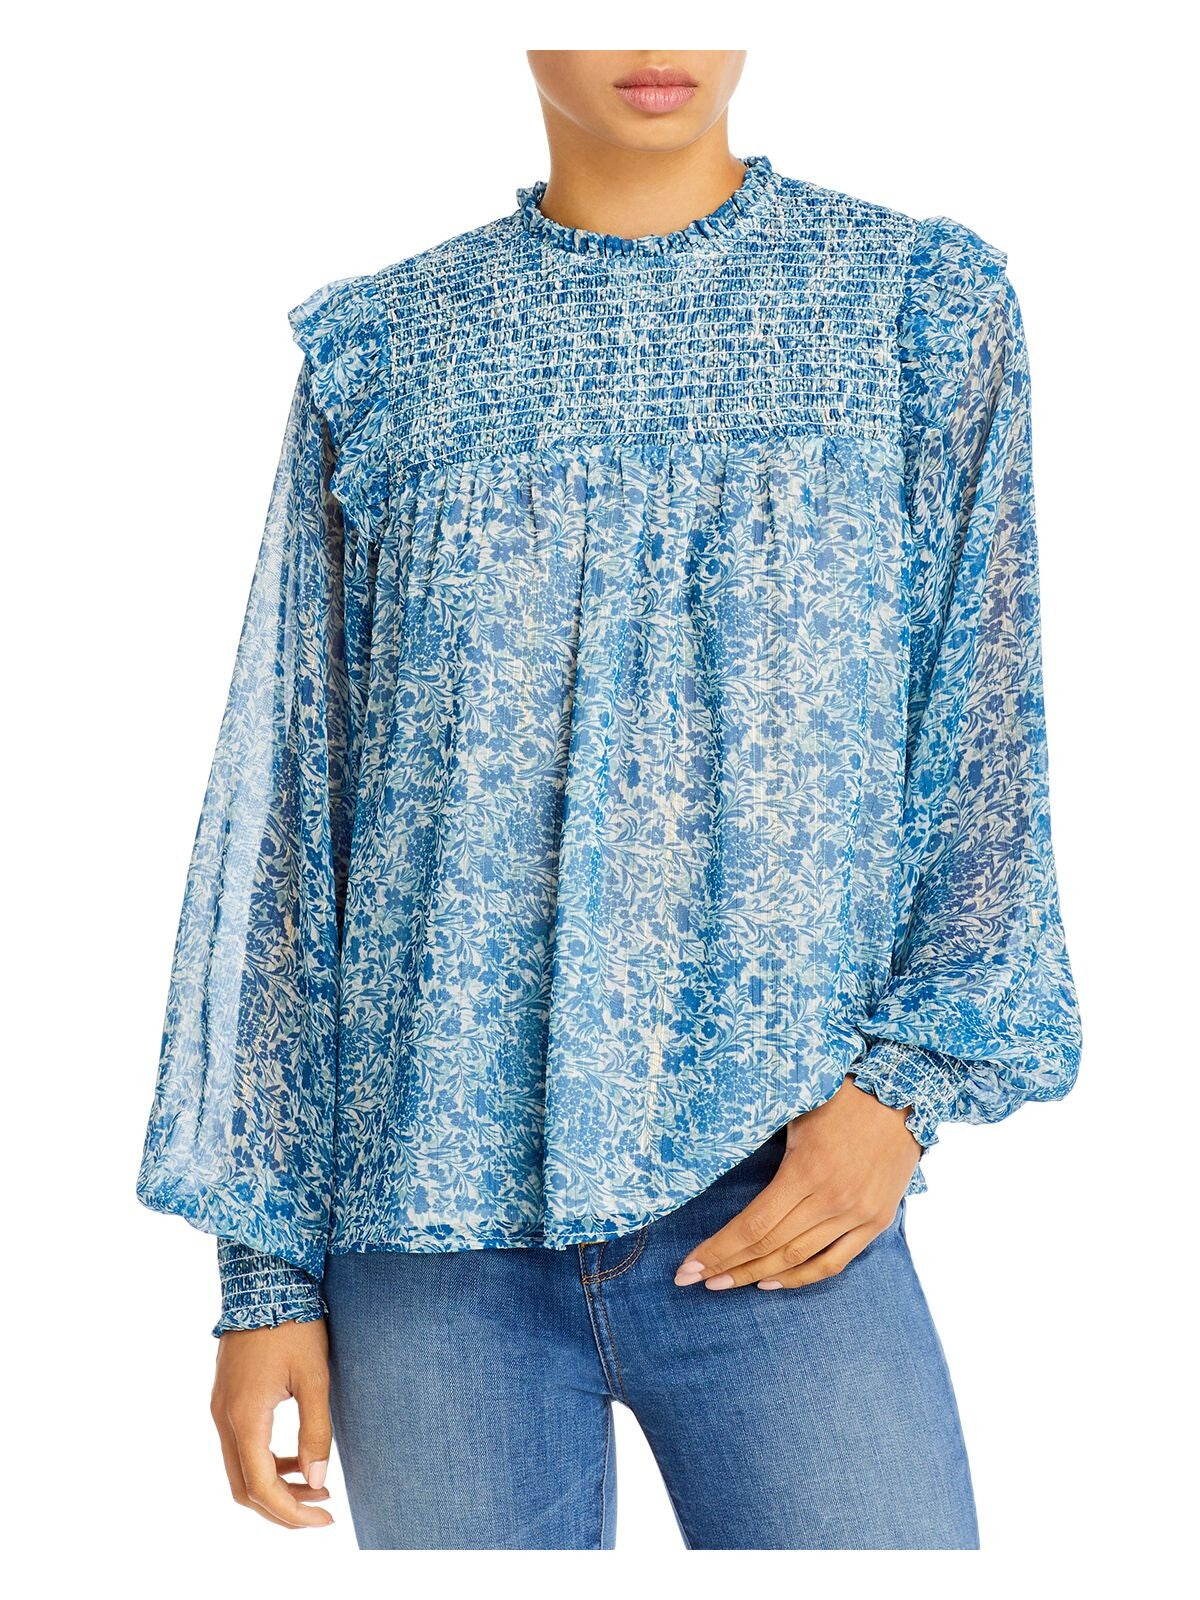 AQUA Womens Blue Zippered Smocked Ruffled Lined Floral Long Sleeve Crew Neck Wear To Work Top S